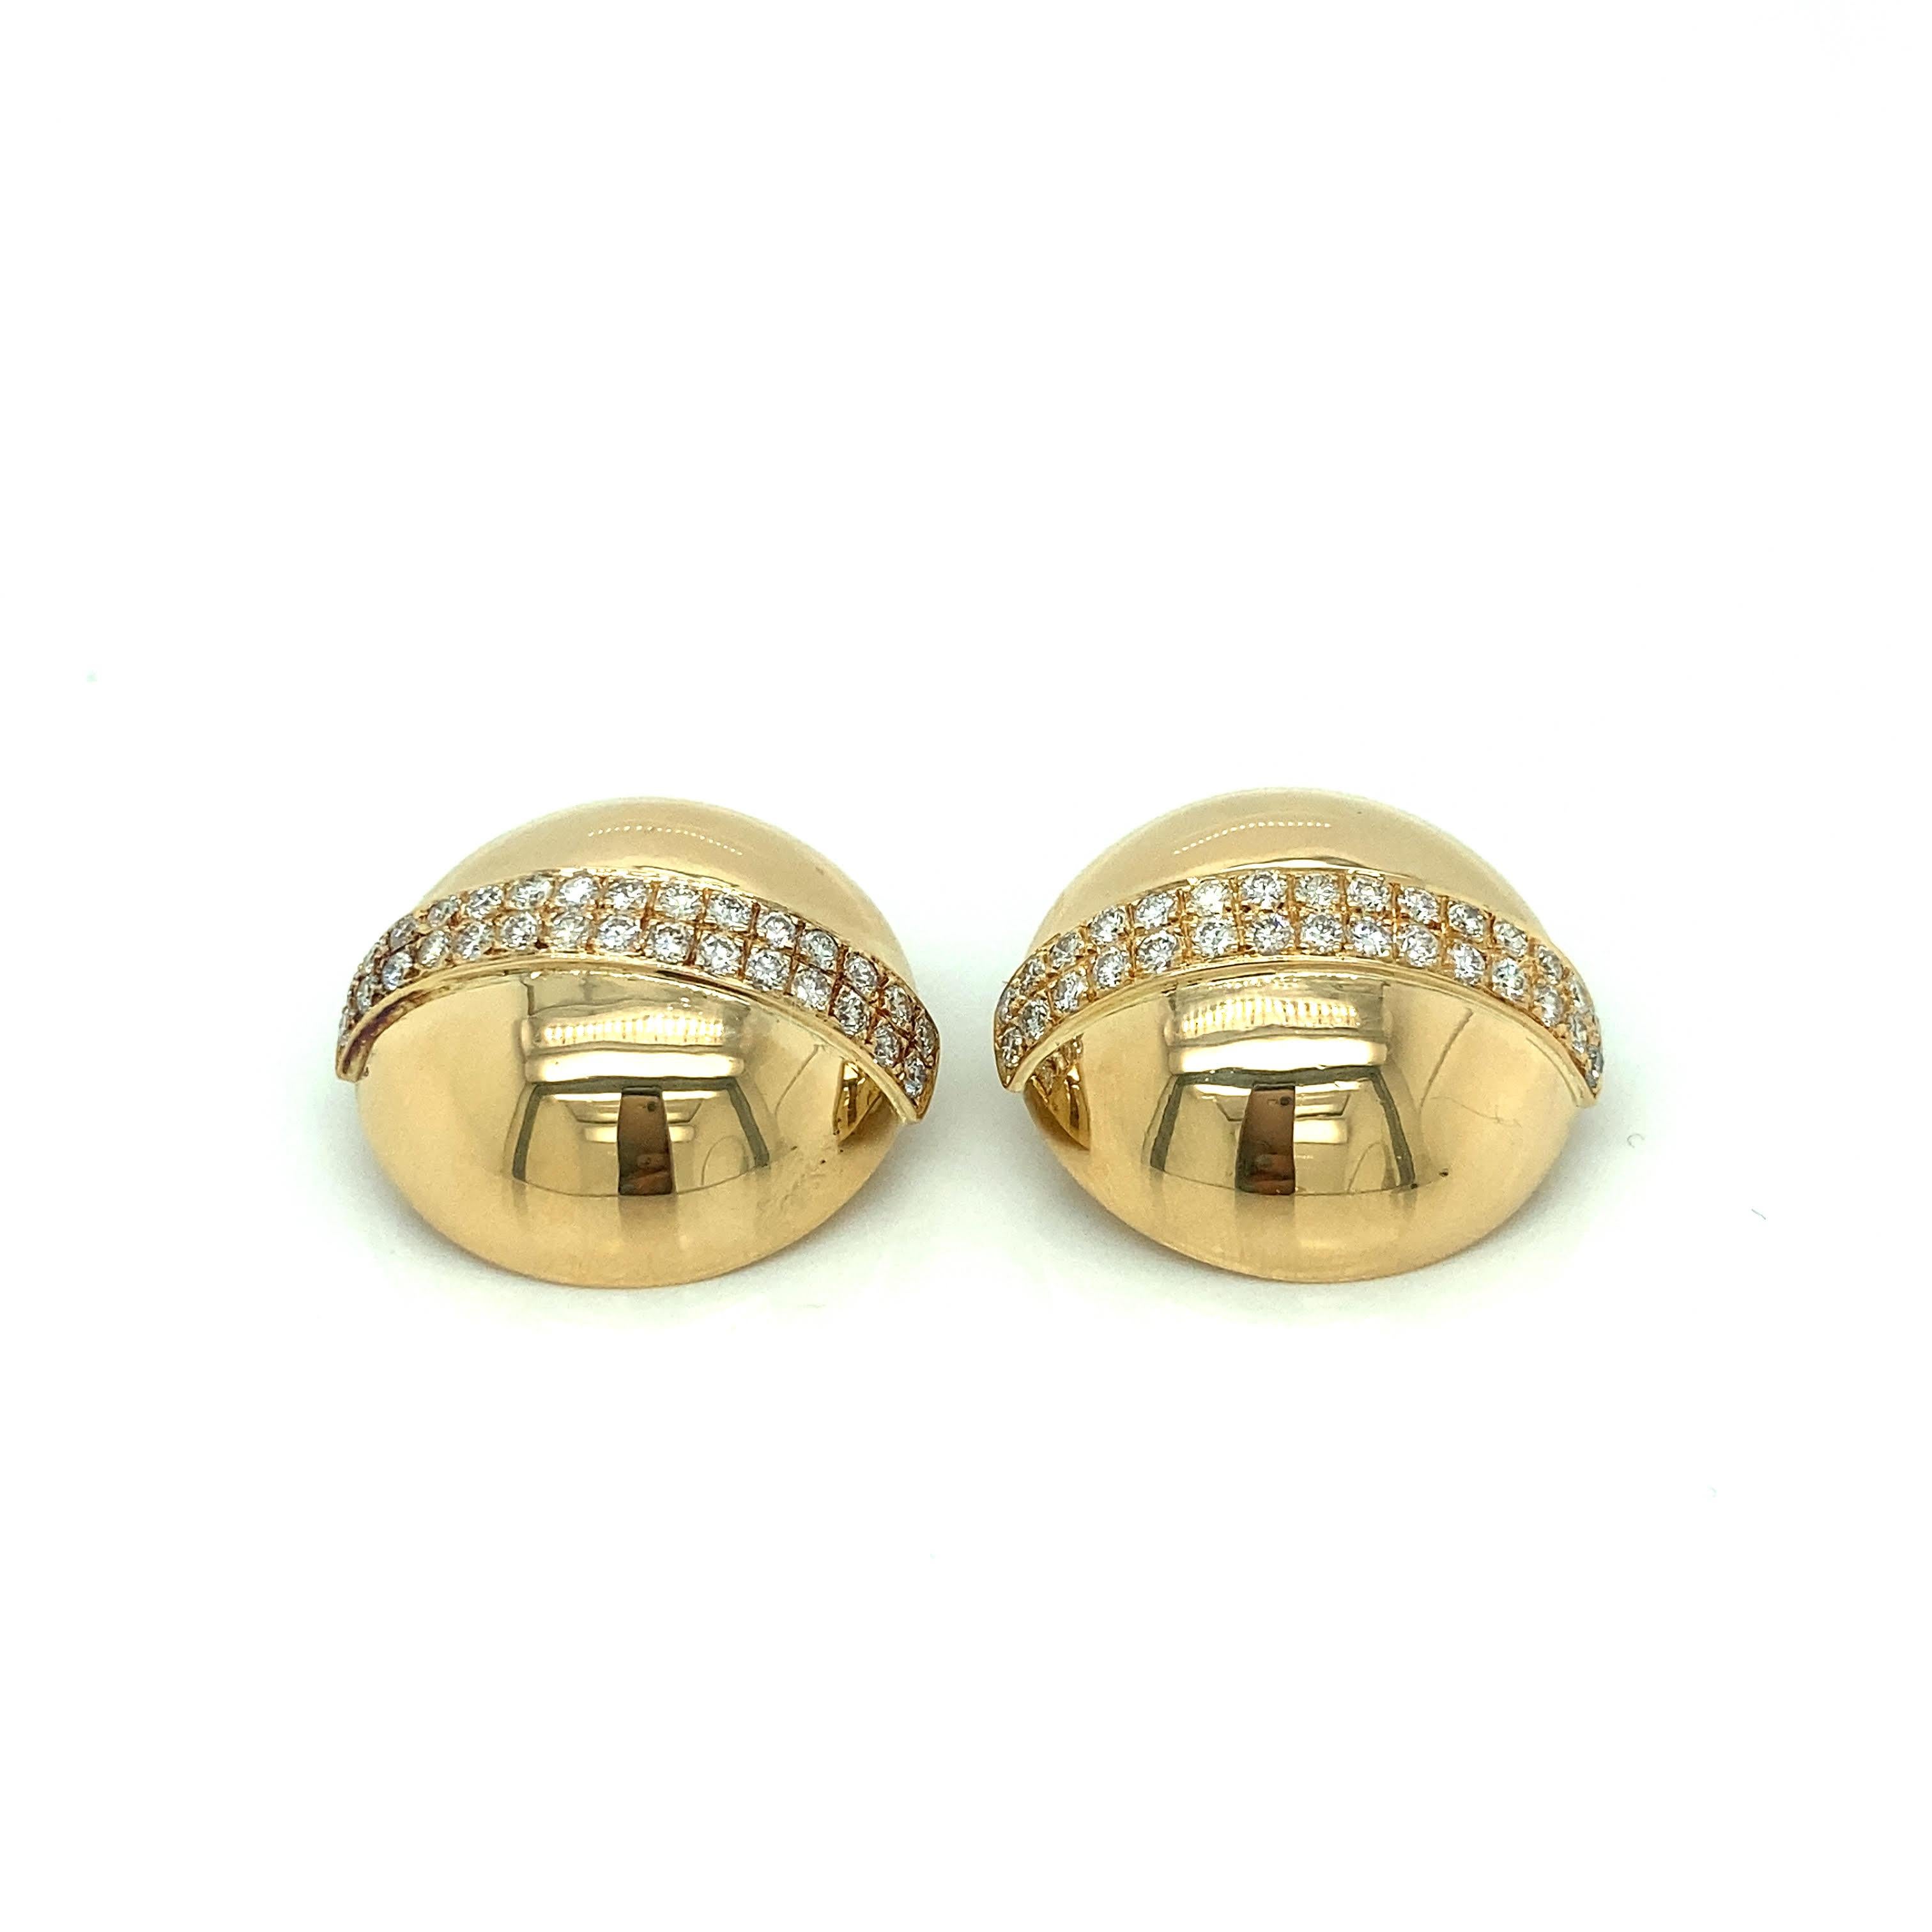 Stunning Solid 18k Yellow Gold Earrings
1.80ct Round diamonds
Can be clip on or use a retractable post
23mm across top of earring
19.5 Grams total weight
Good condition, some minor wear

